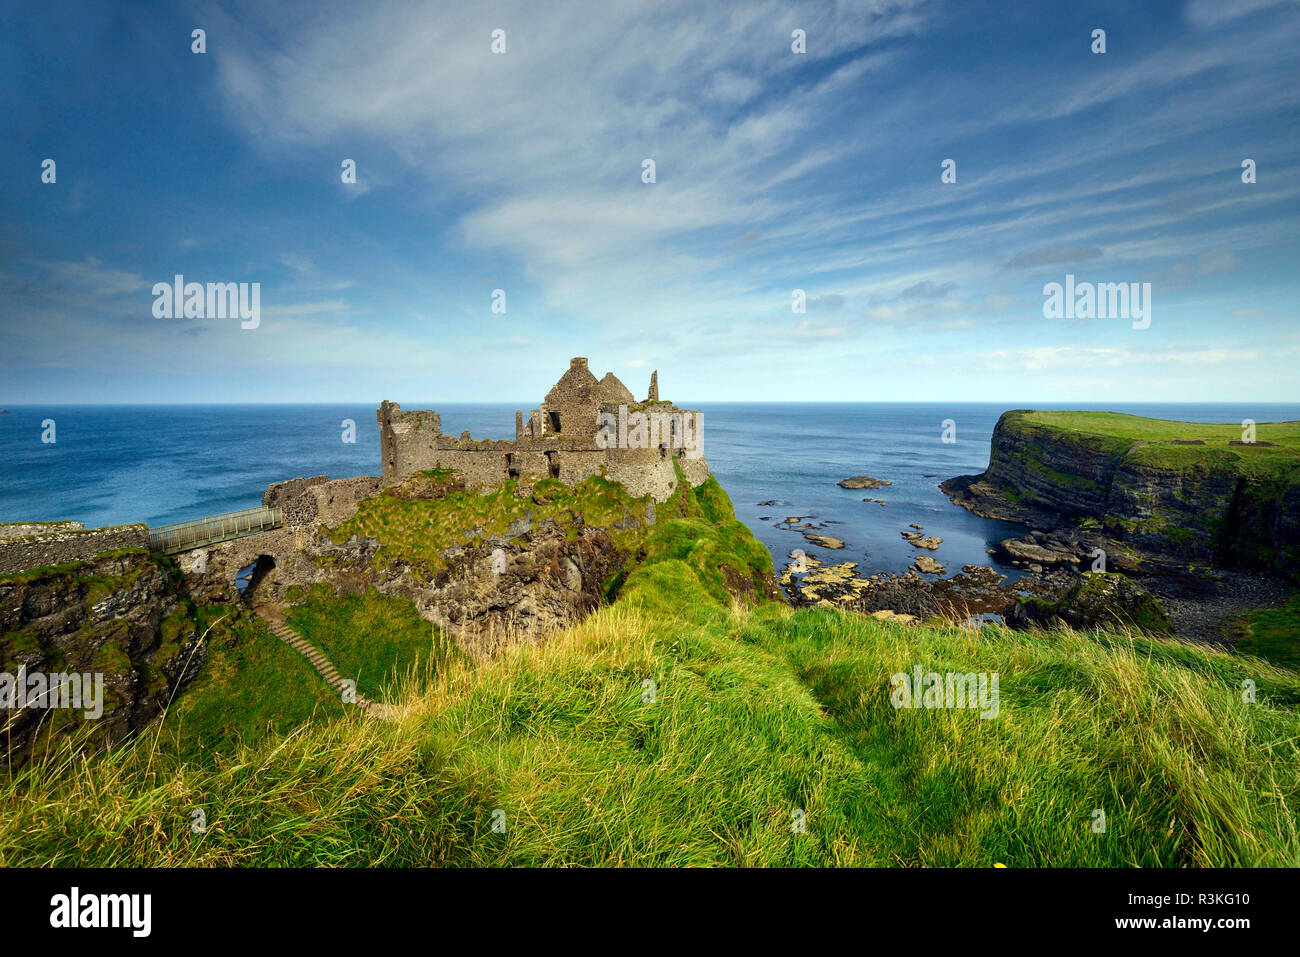 Ireland, Ulster, County Antrim, Bushmills: Dunluce Castle, Pyke Castle, Iron Islands, in the TV series Game of Thrones Stock Photo